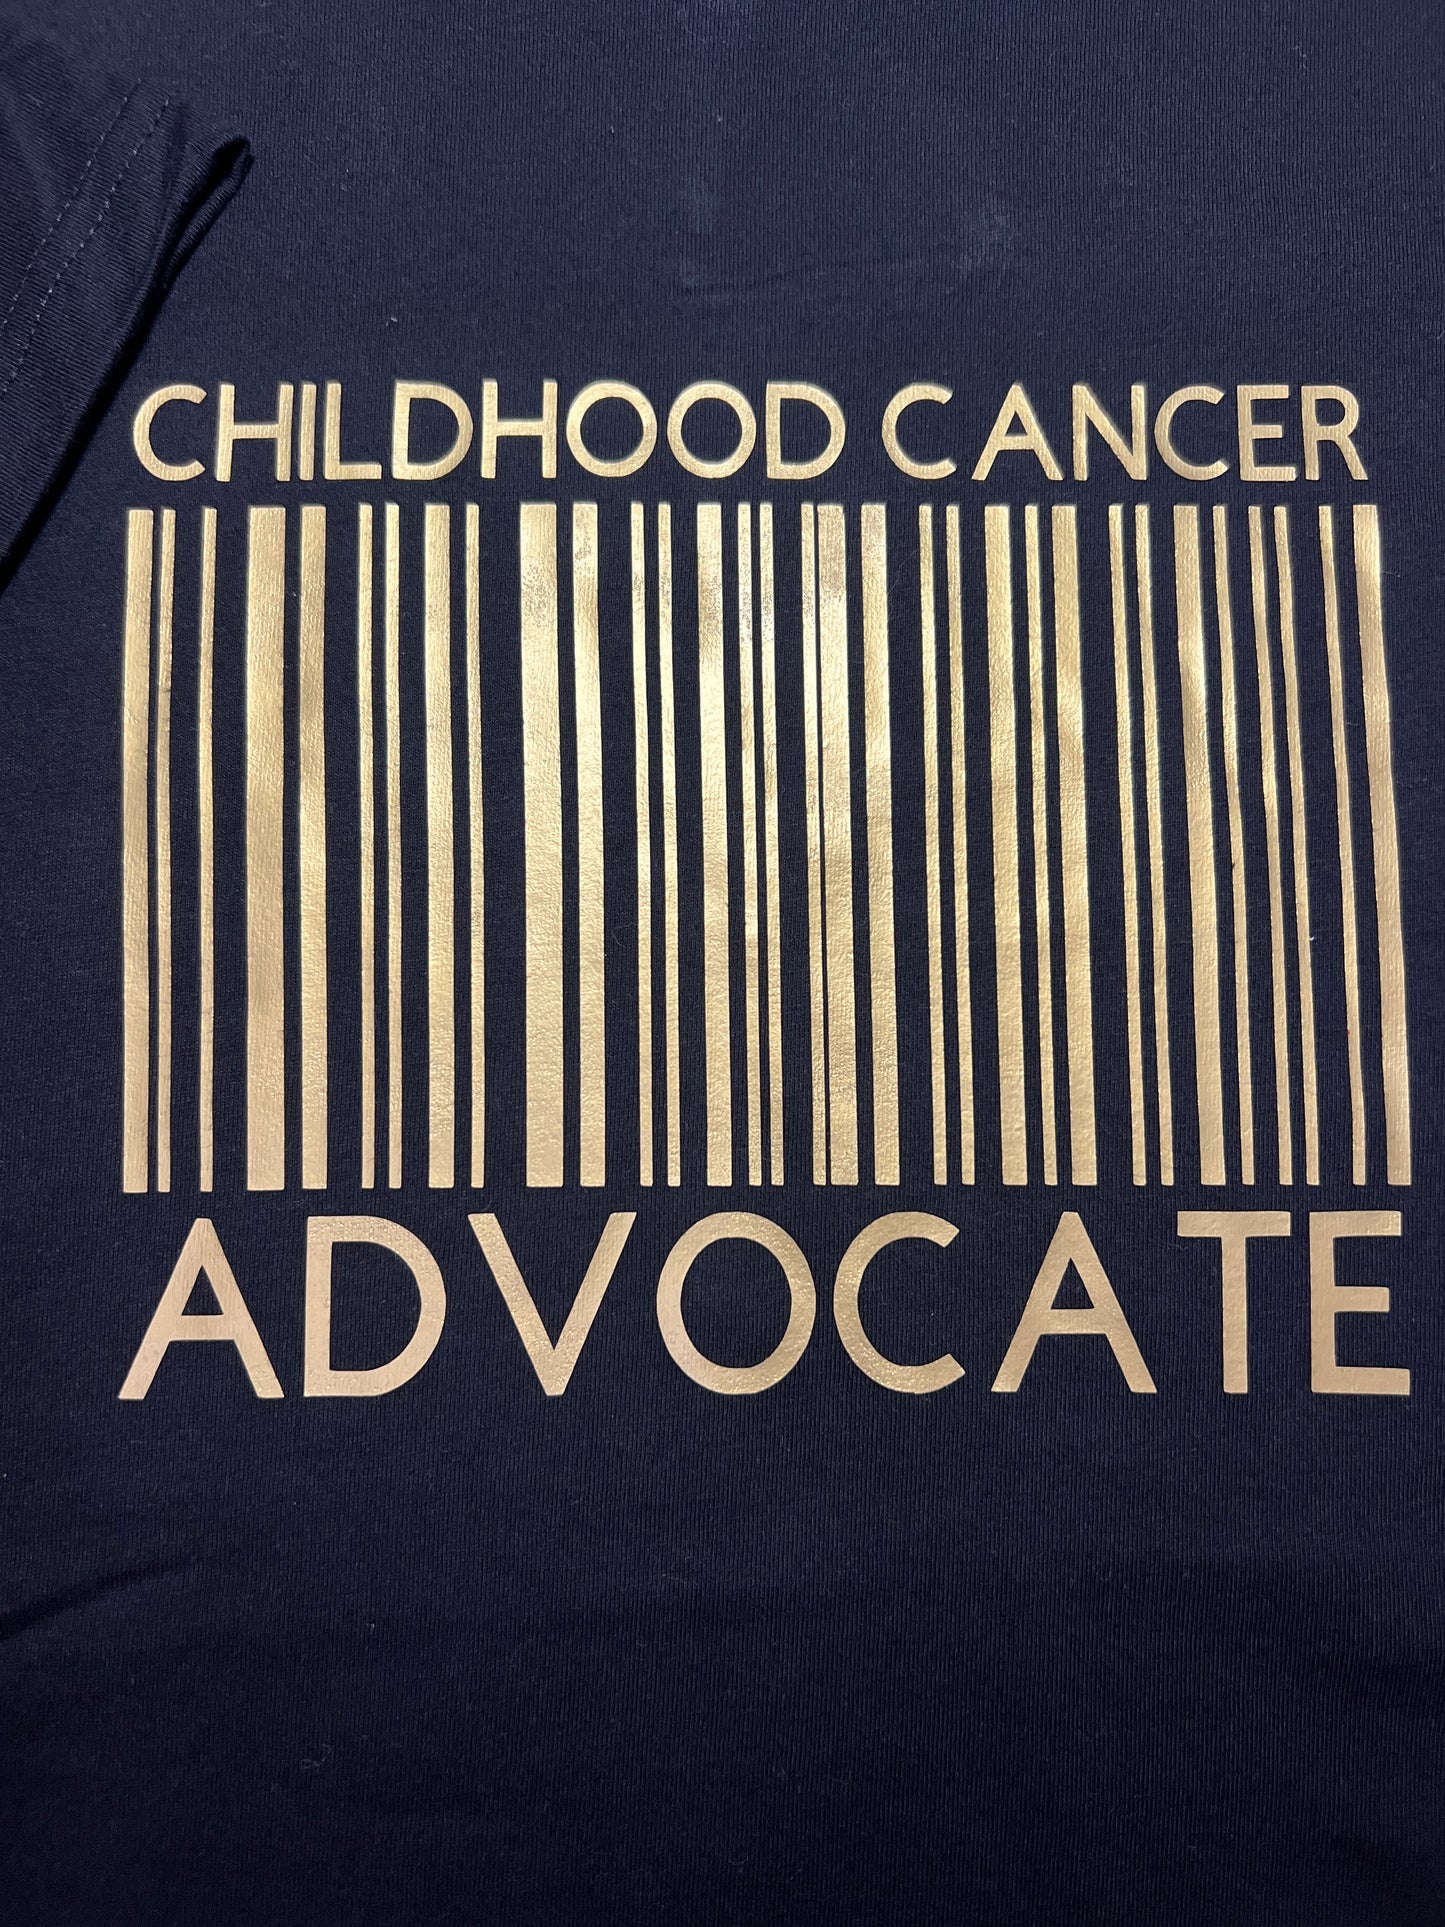 Childhood Cancer Advocate - Barcode T-Shirt